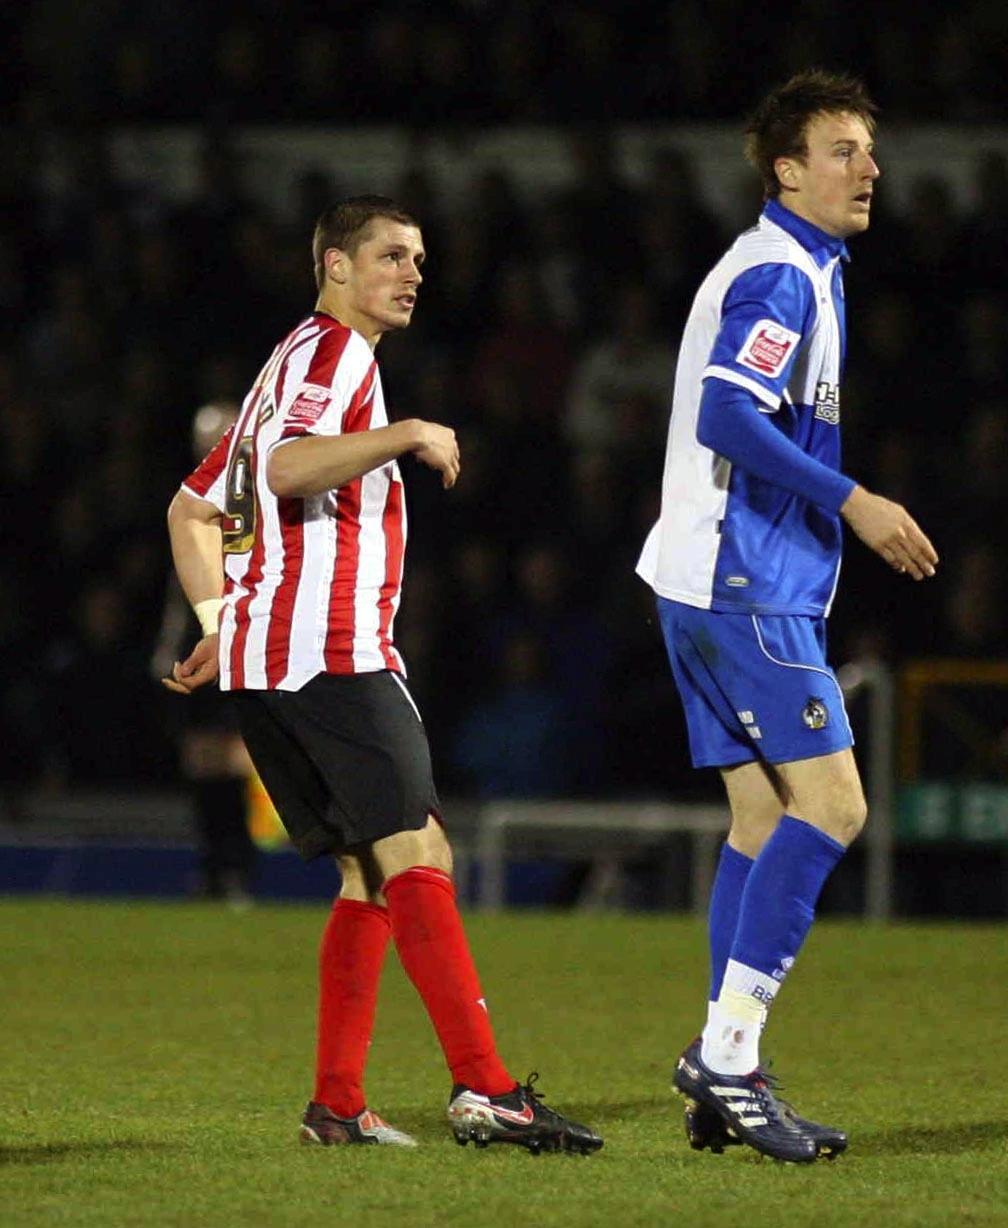 The French midfielder just after scoring his first goal for Saints against Bristol Rovers in April 2010.